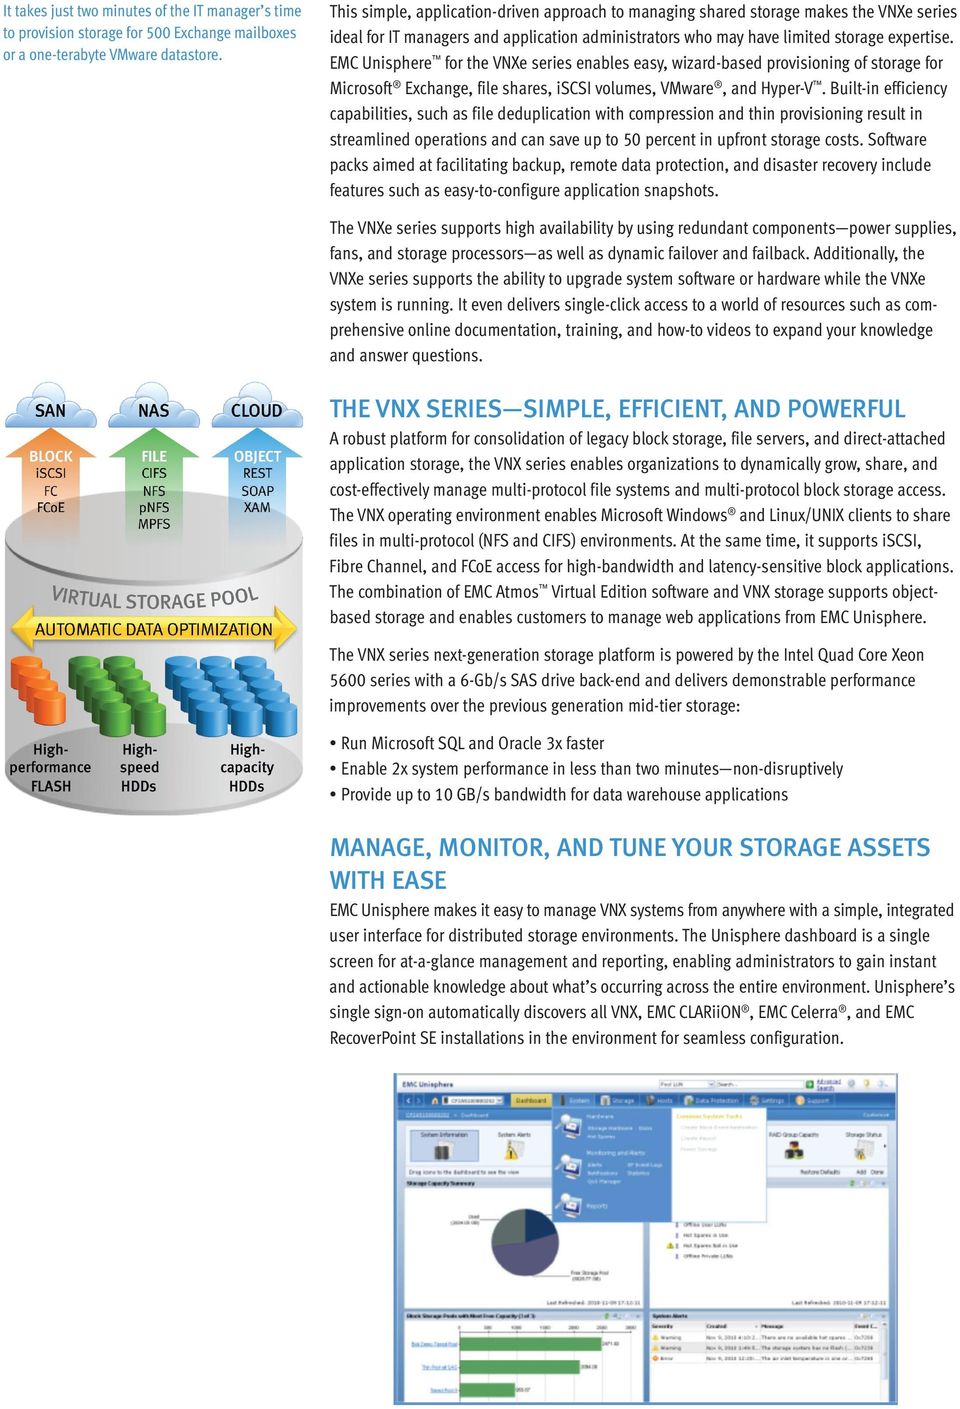 EMC Unisphere for the VNXe series enables easy, wizard-based provisioning of storage for Microsoft Exchange, file shares, iscsi volumes, VMware, and Hyper-V.